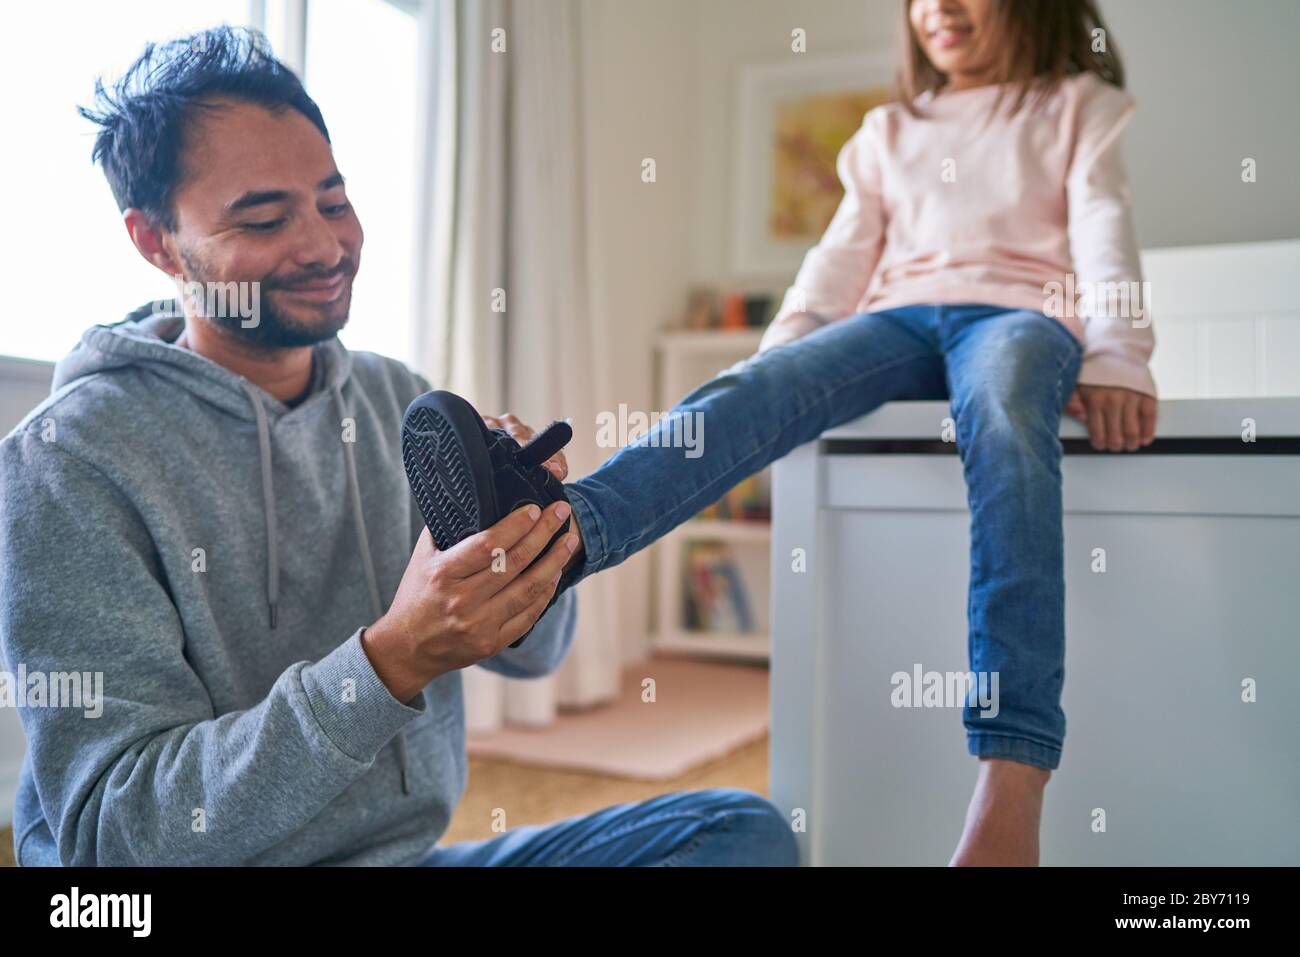 Father helping daughter put on shoes Stock Photo